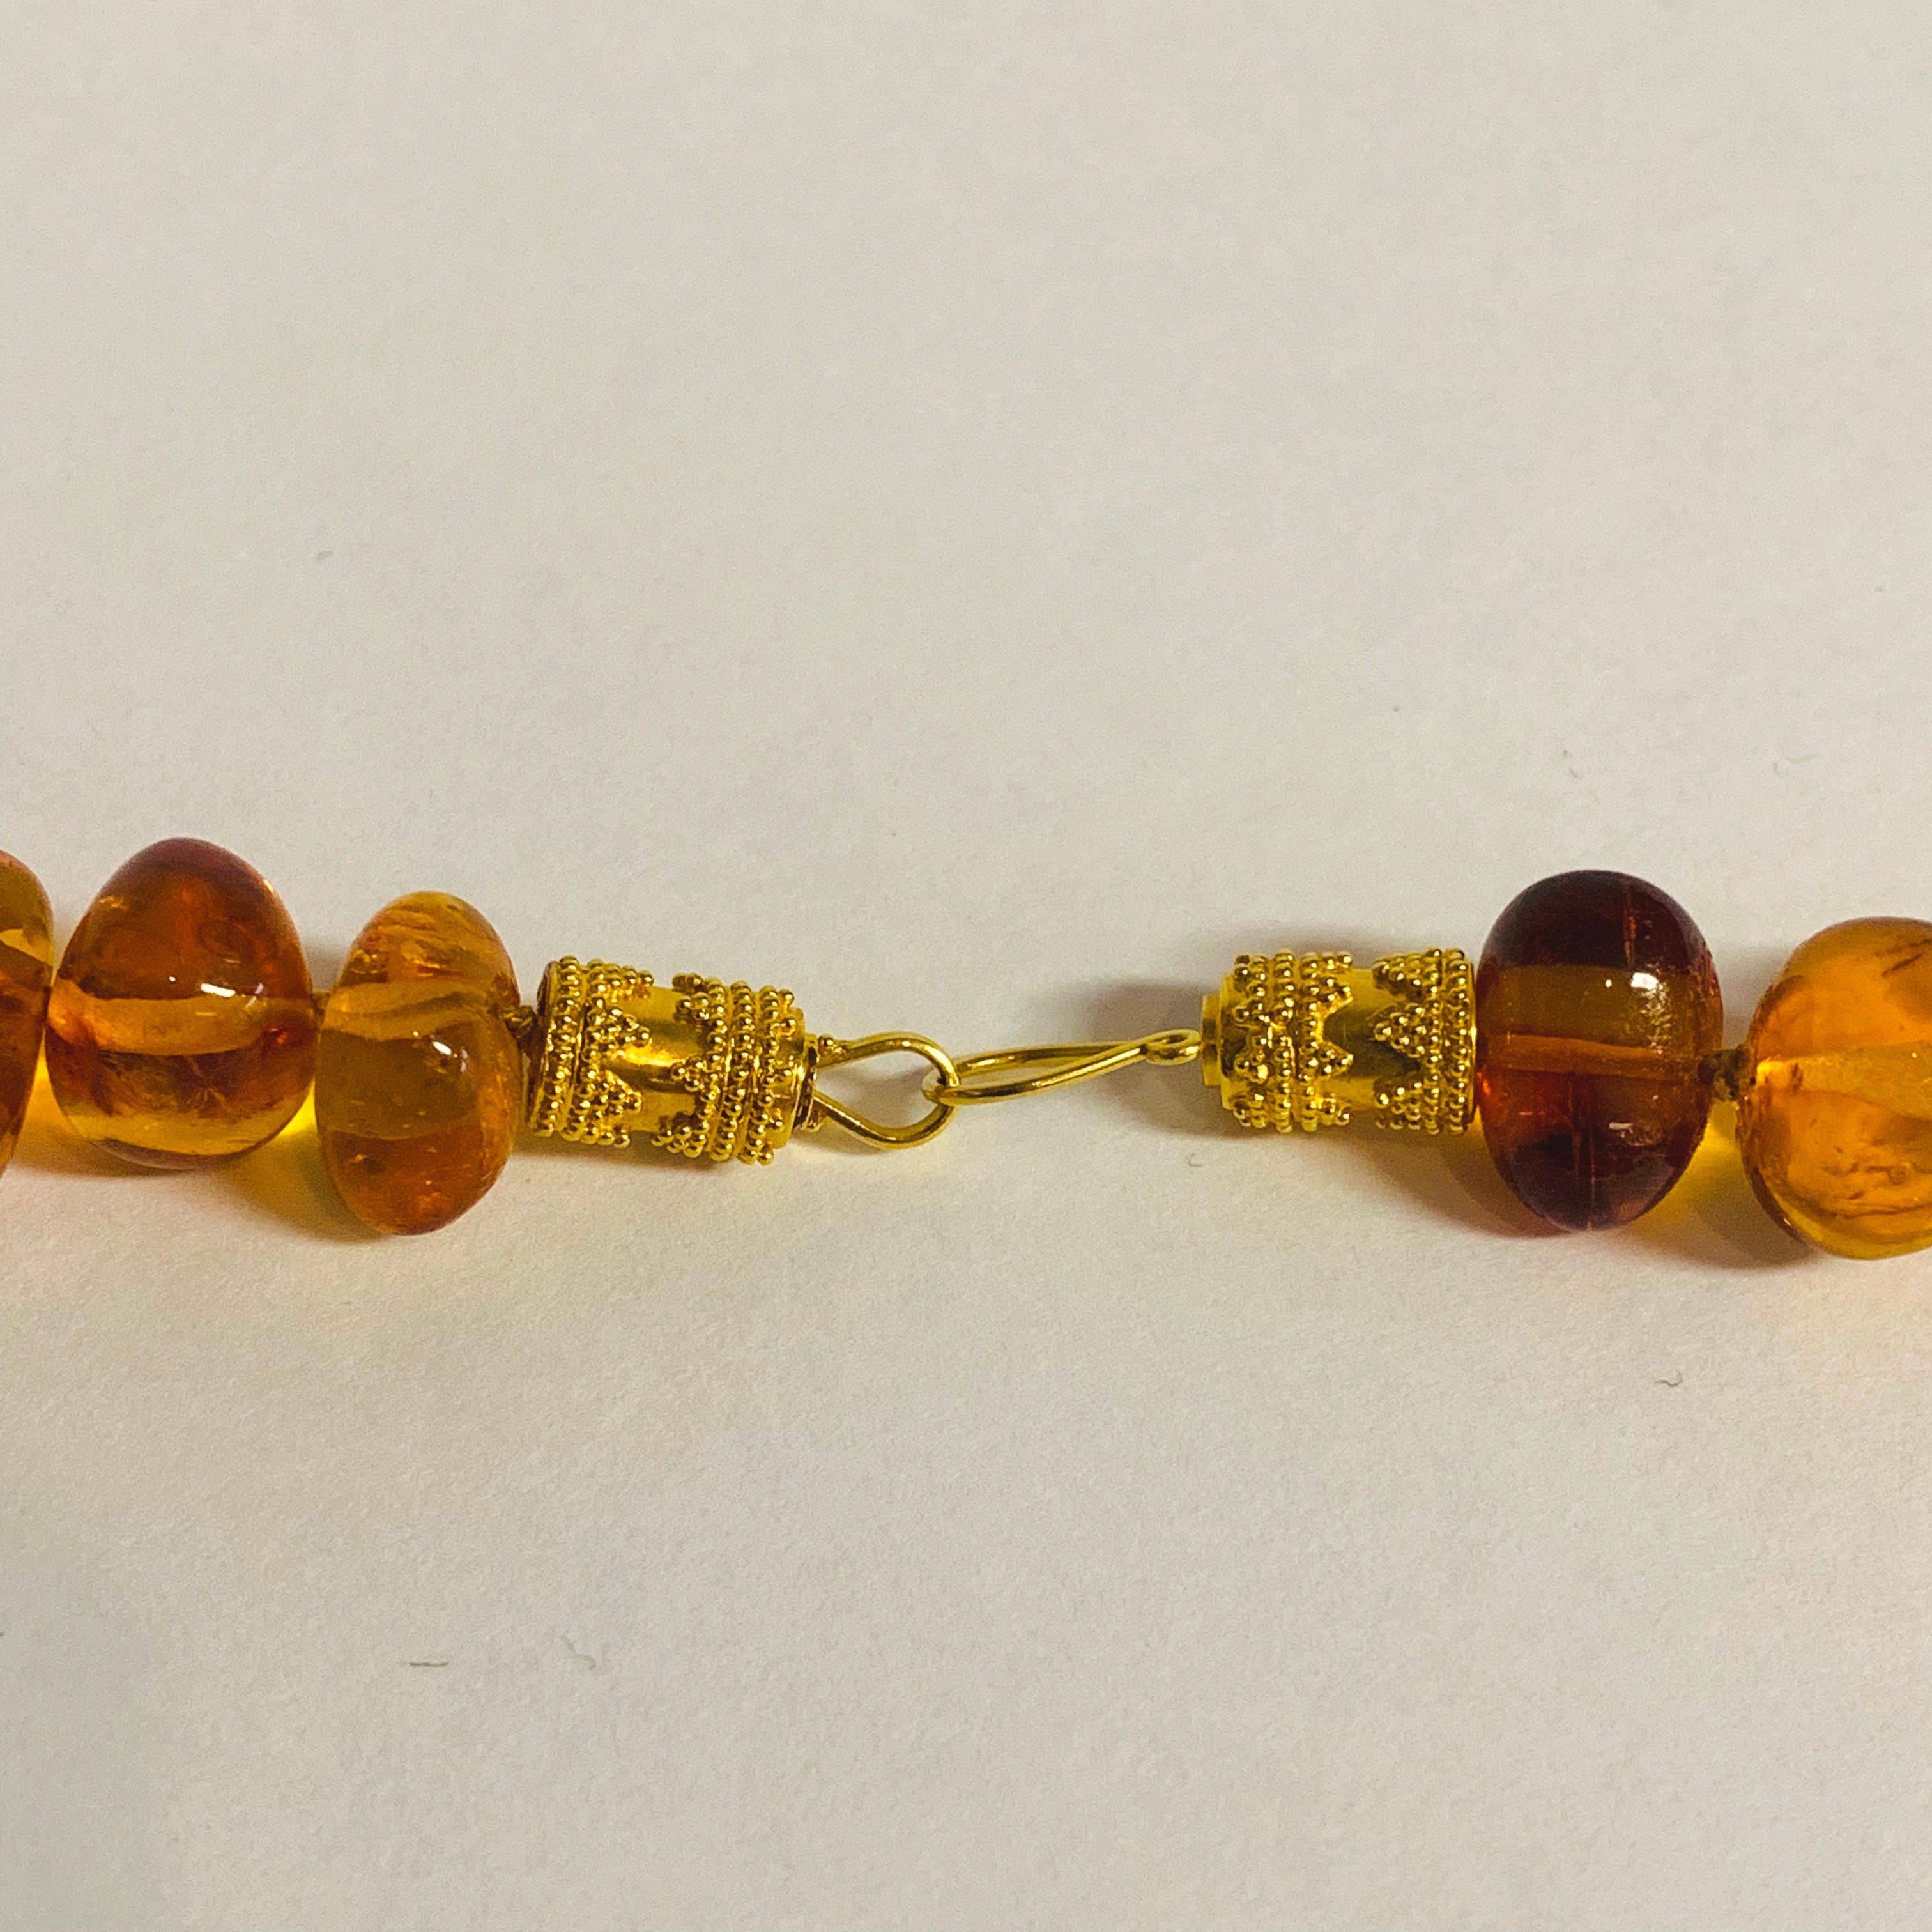 antique amber necklace